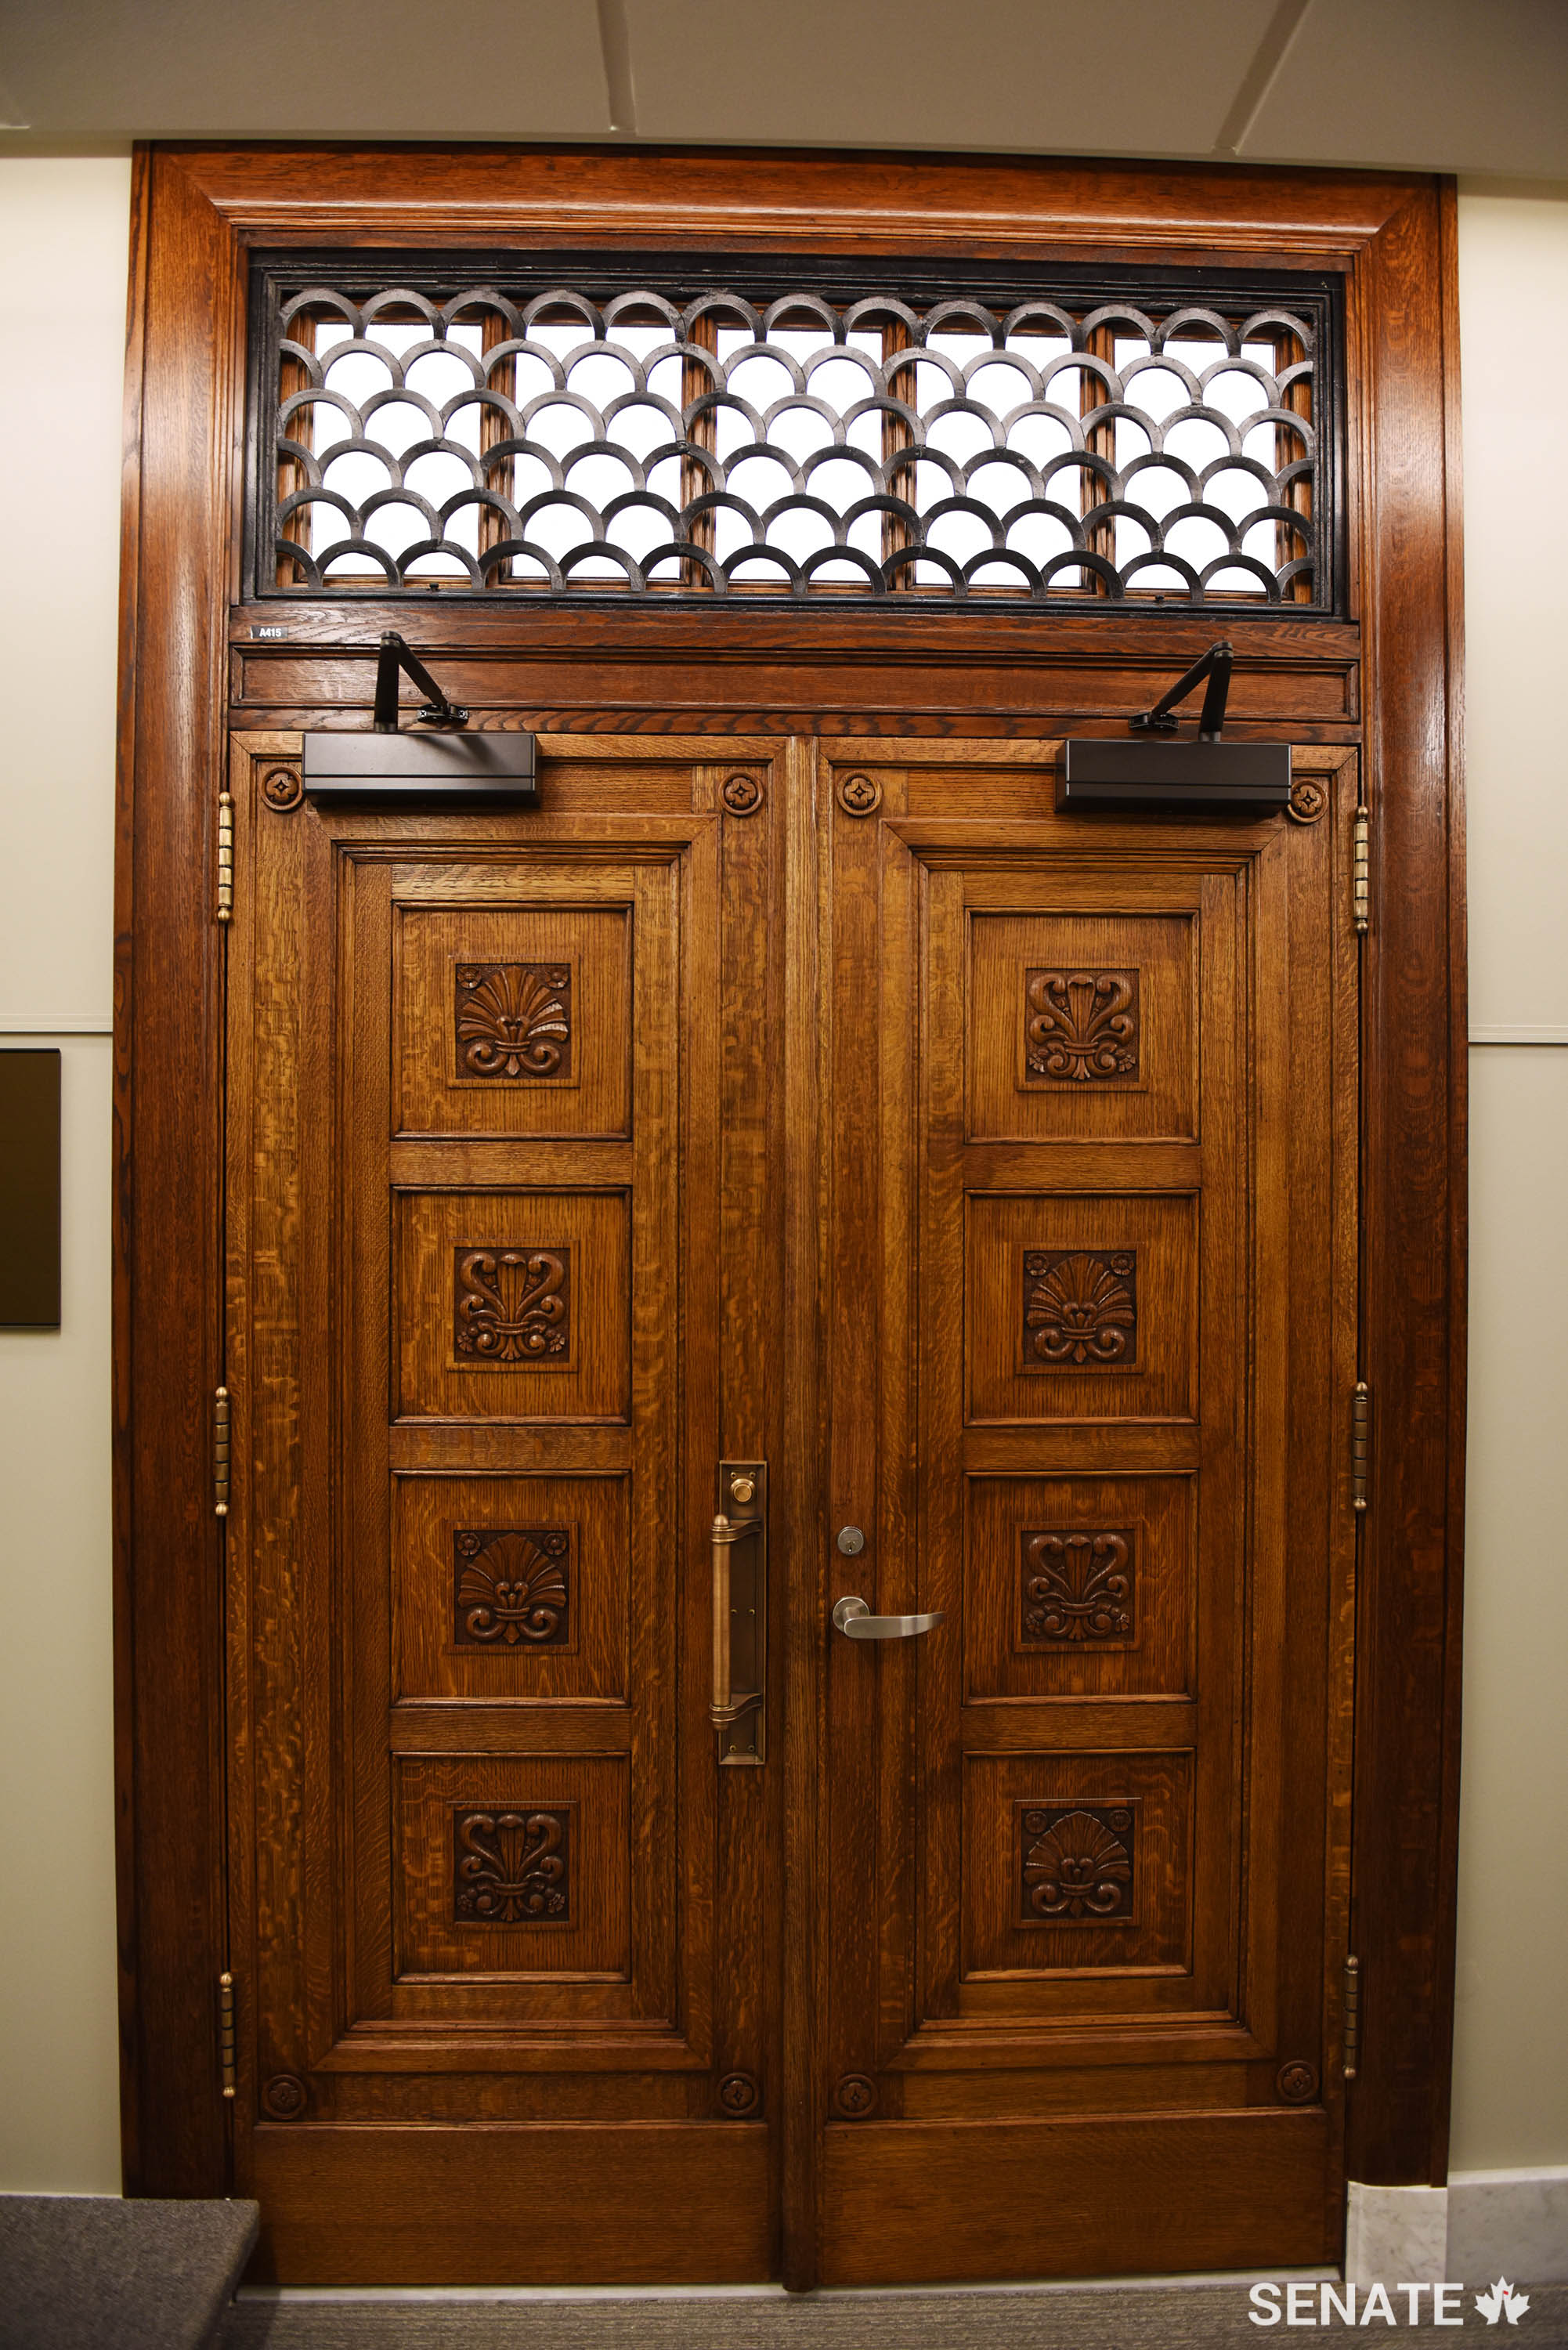 Salvaging original materials — like those found in this doorway and in the marble baseboards lining the hallways of the Senate of Canada Building — preserves the cultural heritage of the building.